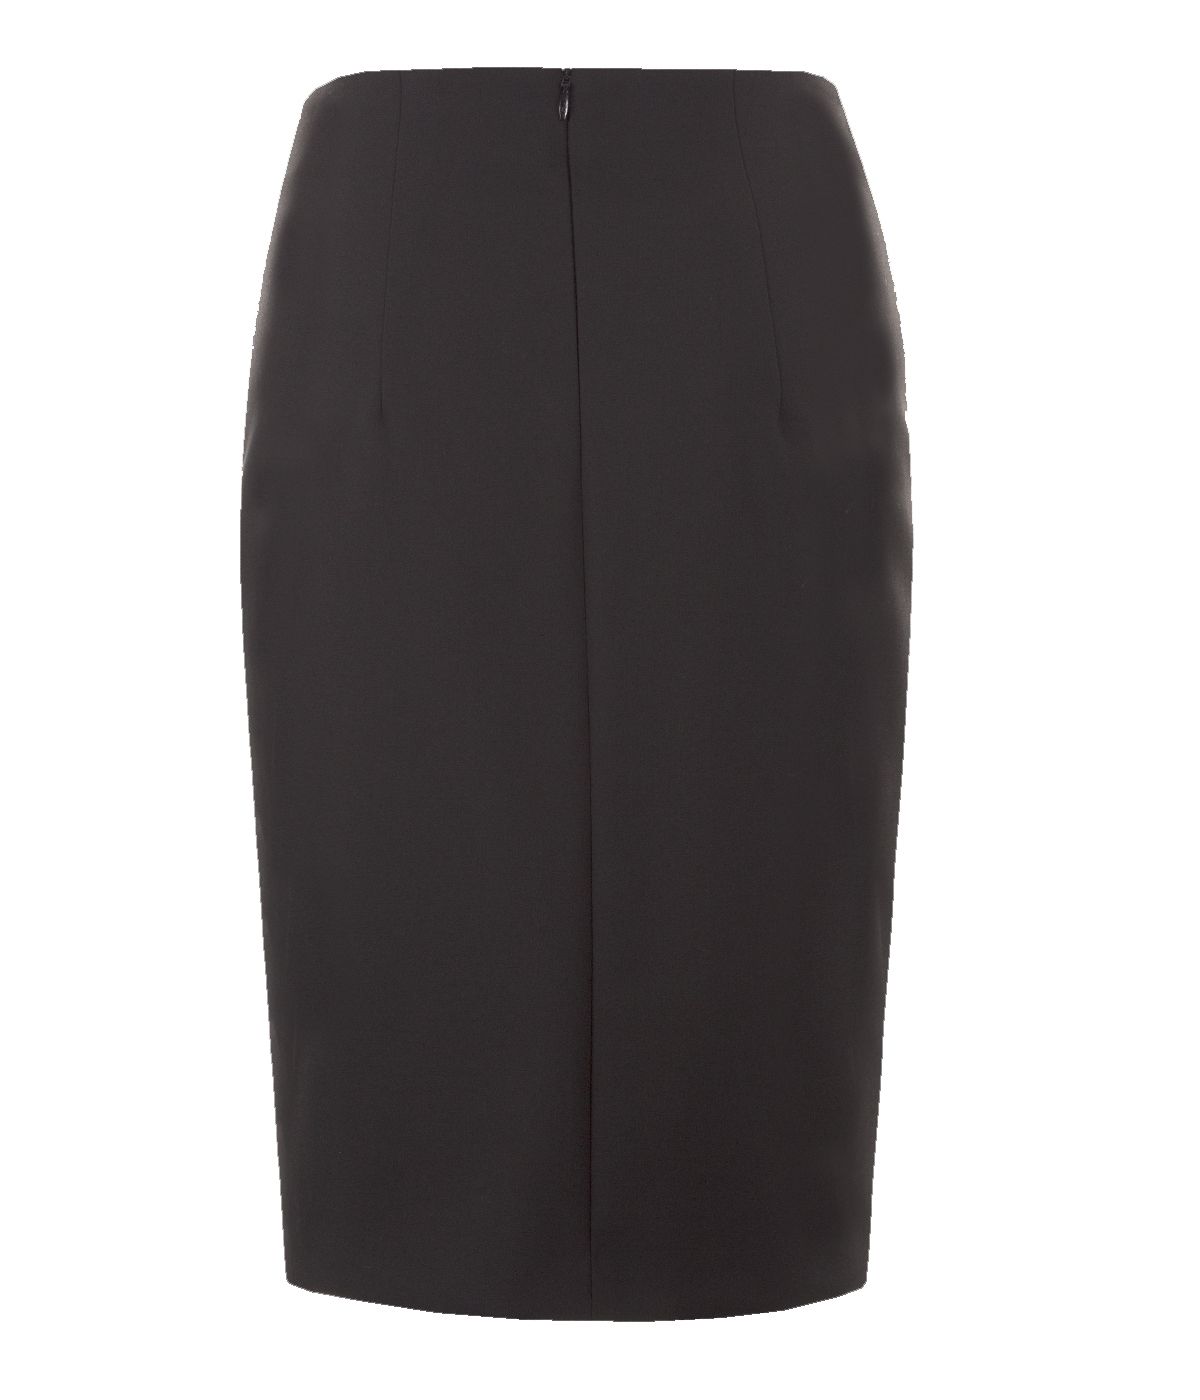 Pencil skirt with front slit, diagonal seam and decorative buckle on the waistline 1